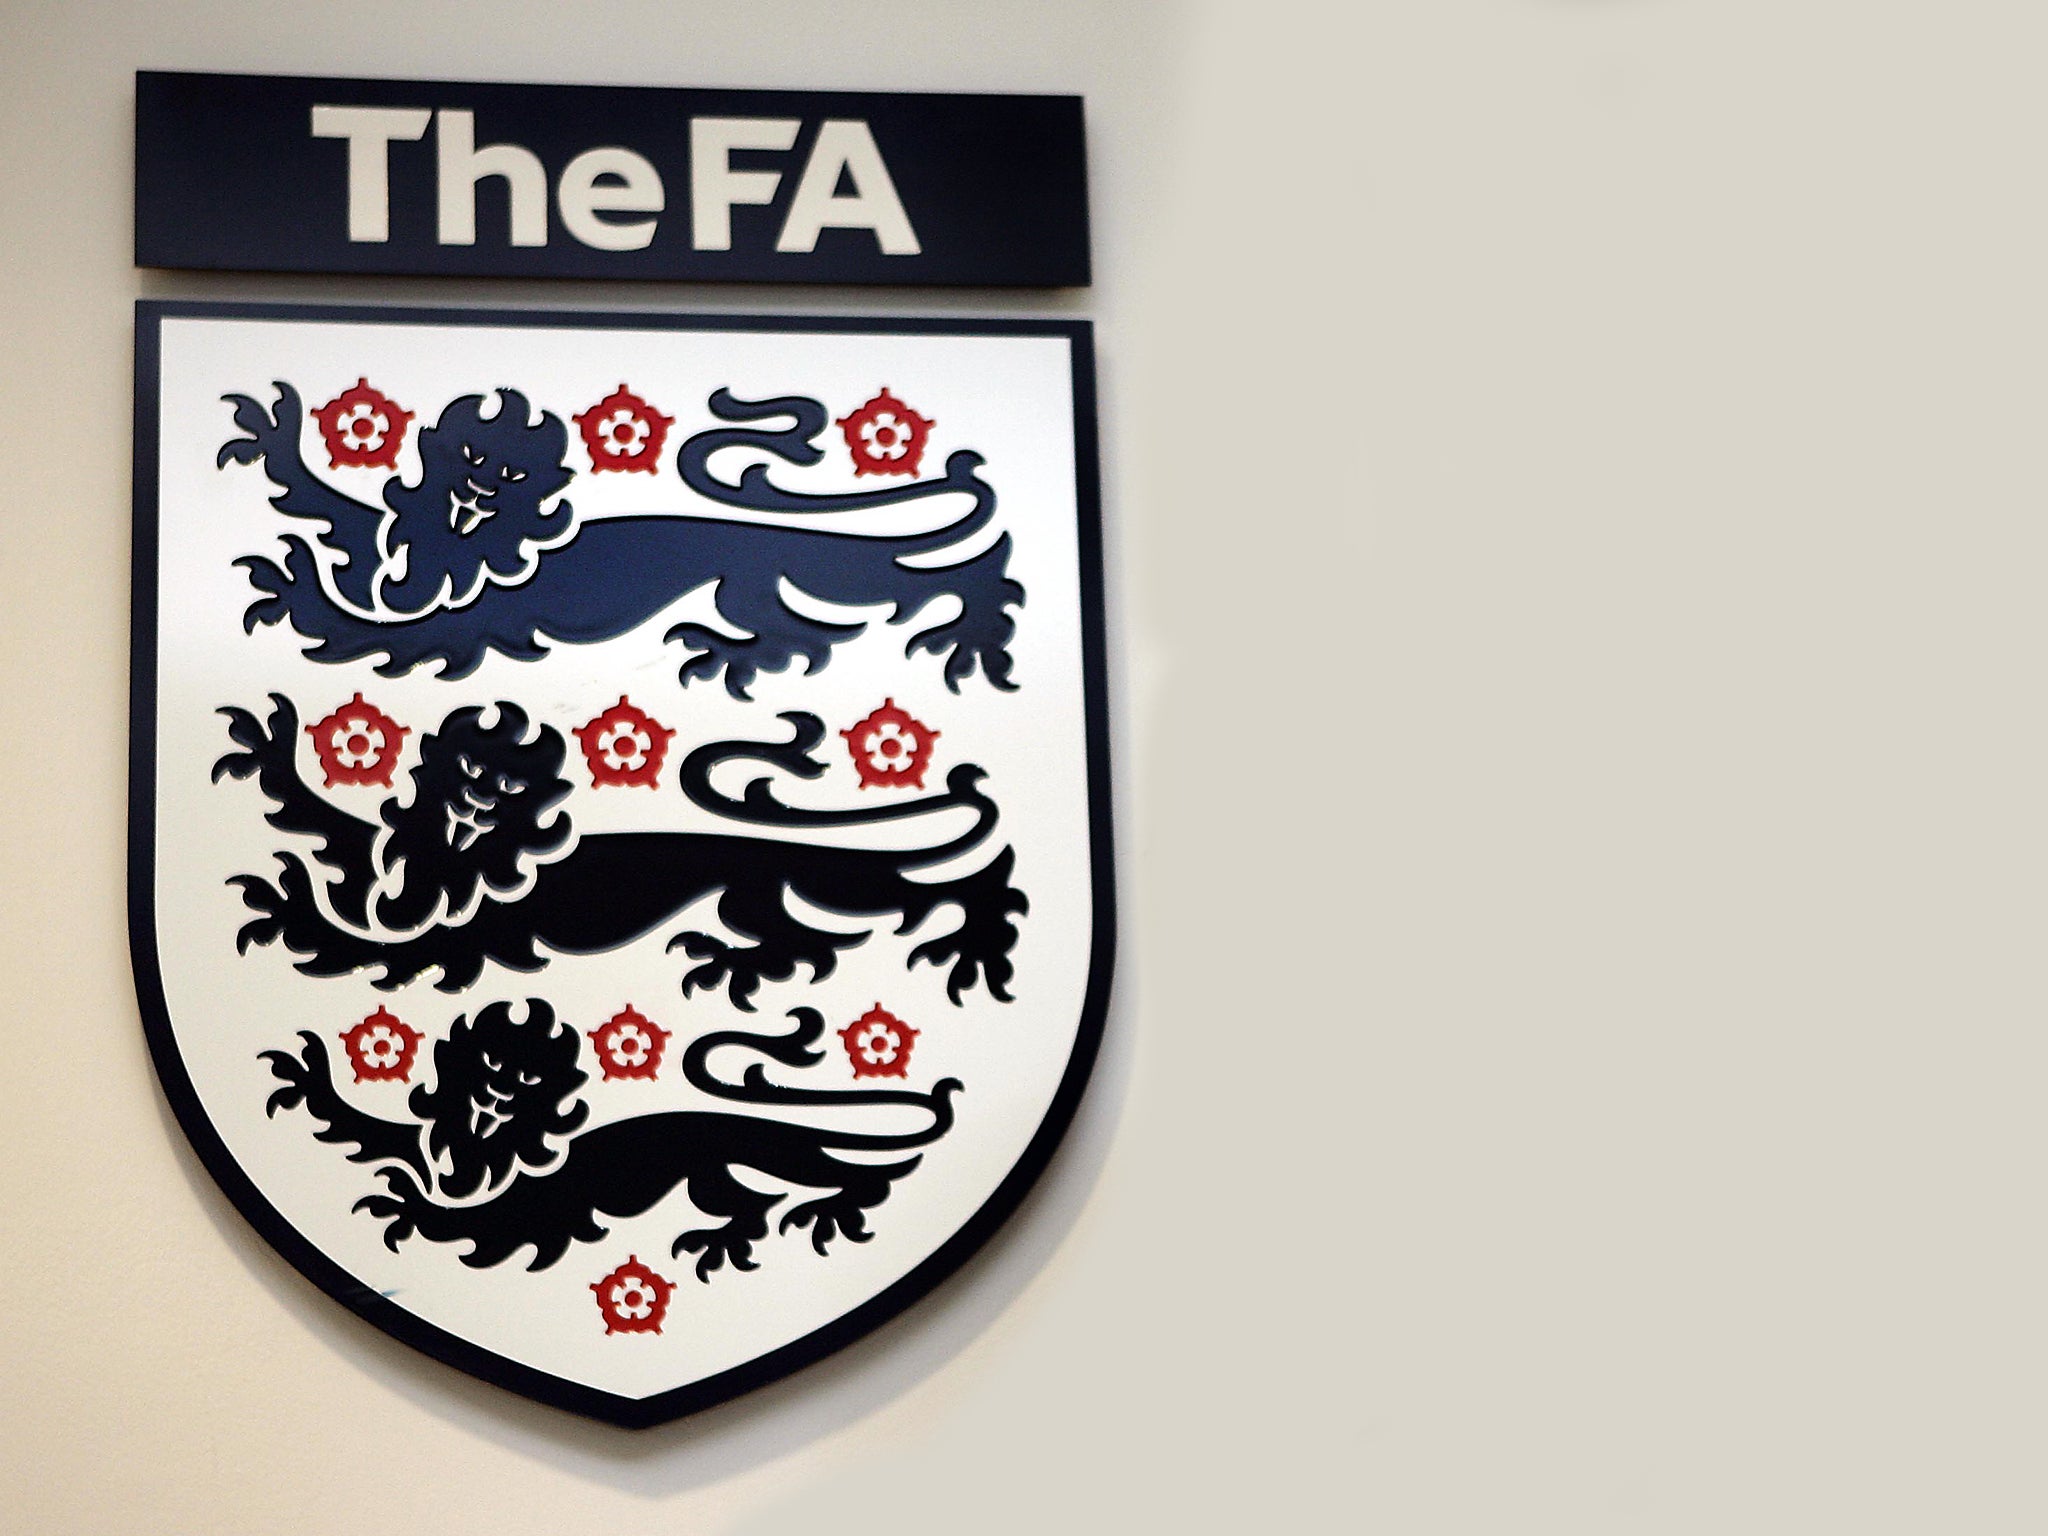 The FA is adopting the measure as part of its plan to boost diversity in the game